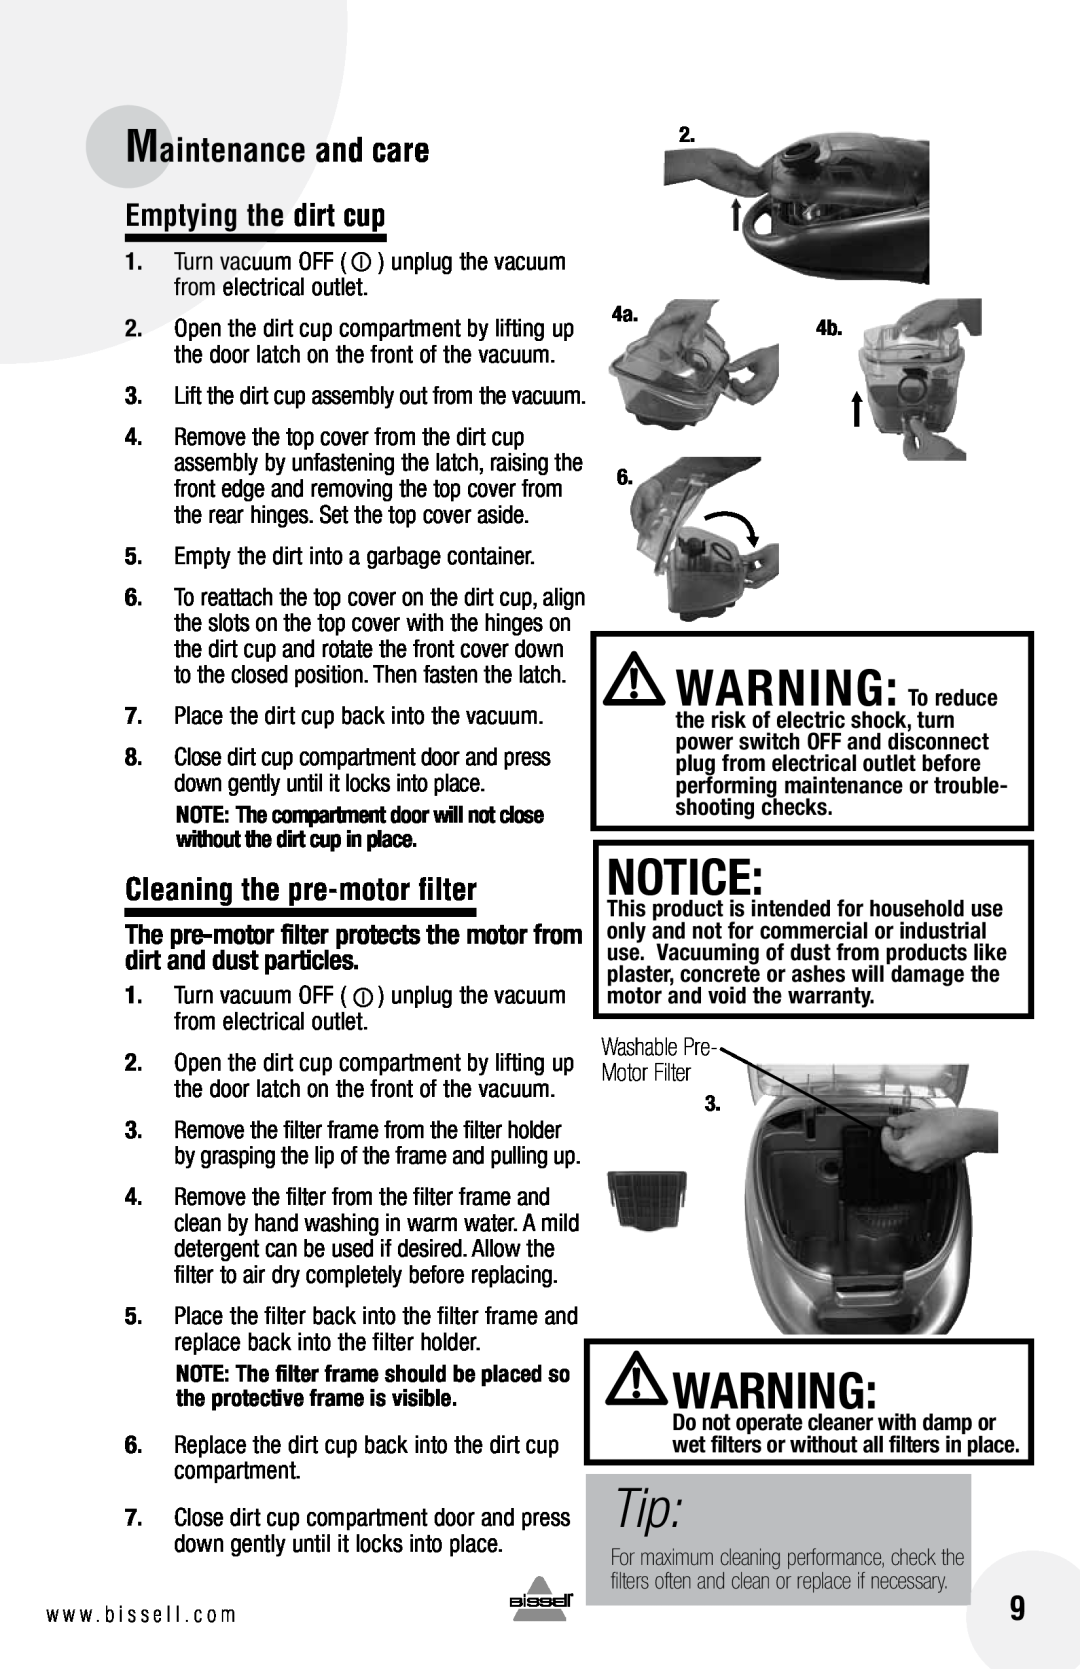 Bissell 33N7 warranty Maintenance and care, Emptying the dirt cup, Cleaning the pre-motorfilter, WARNING To reduce 